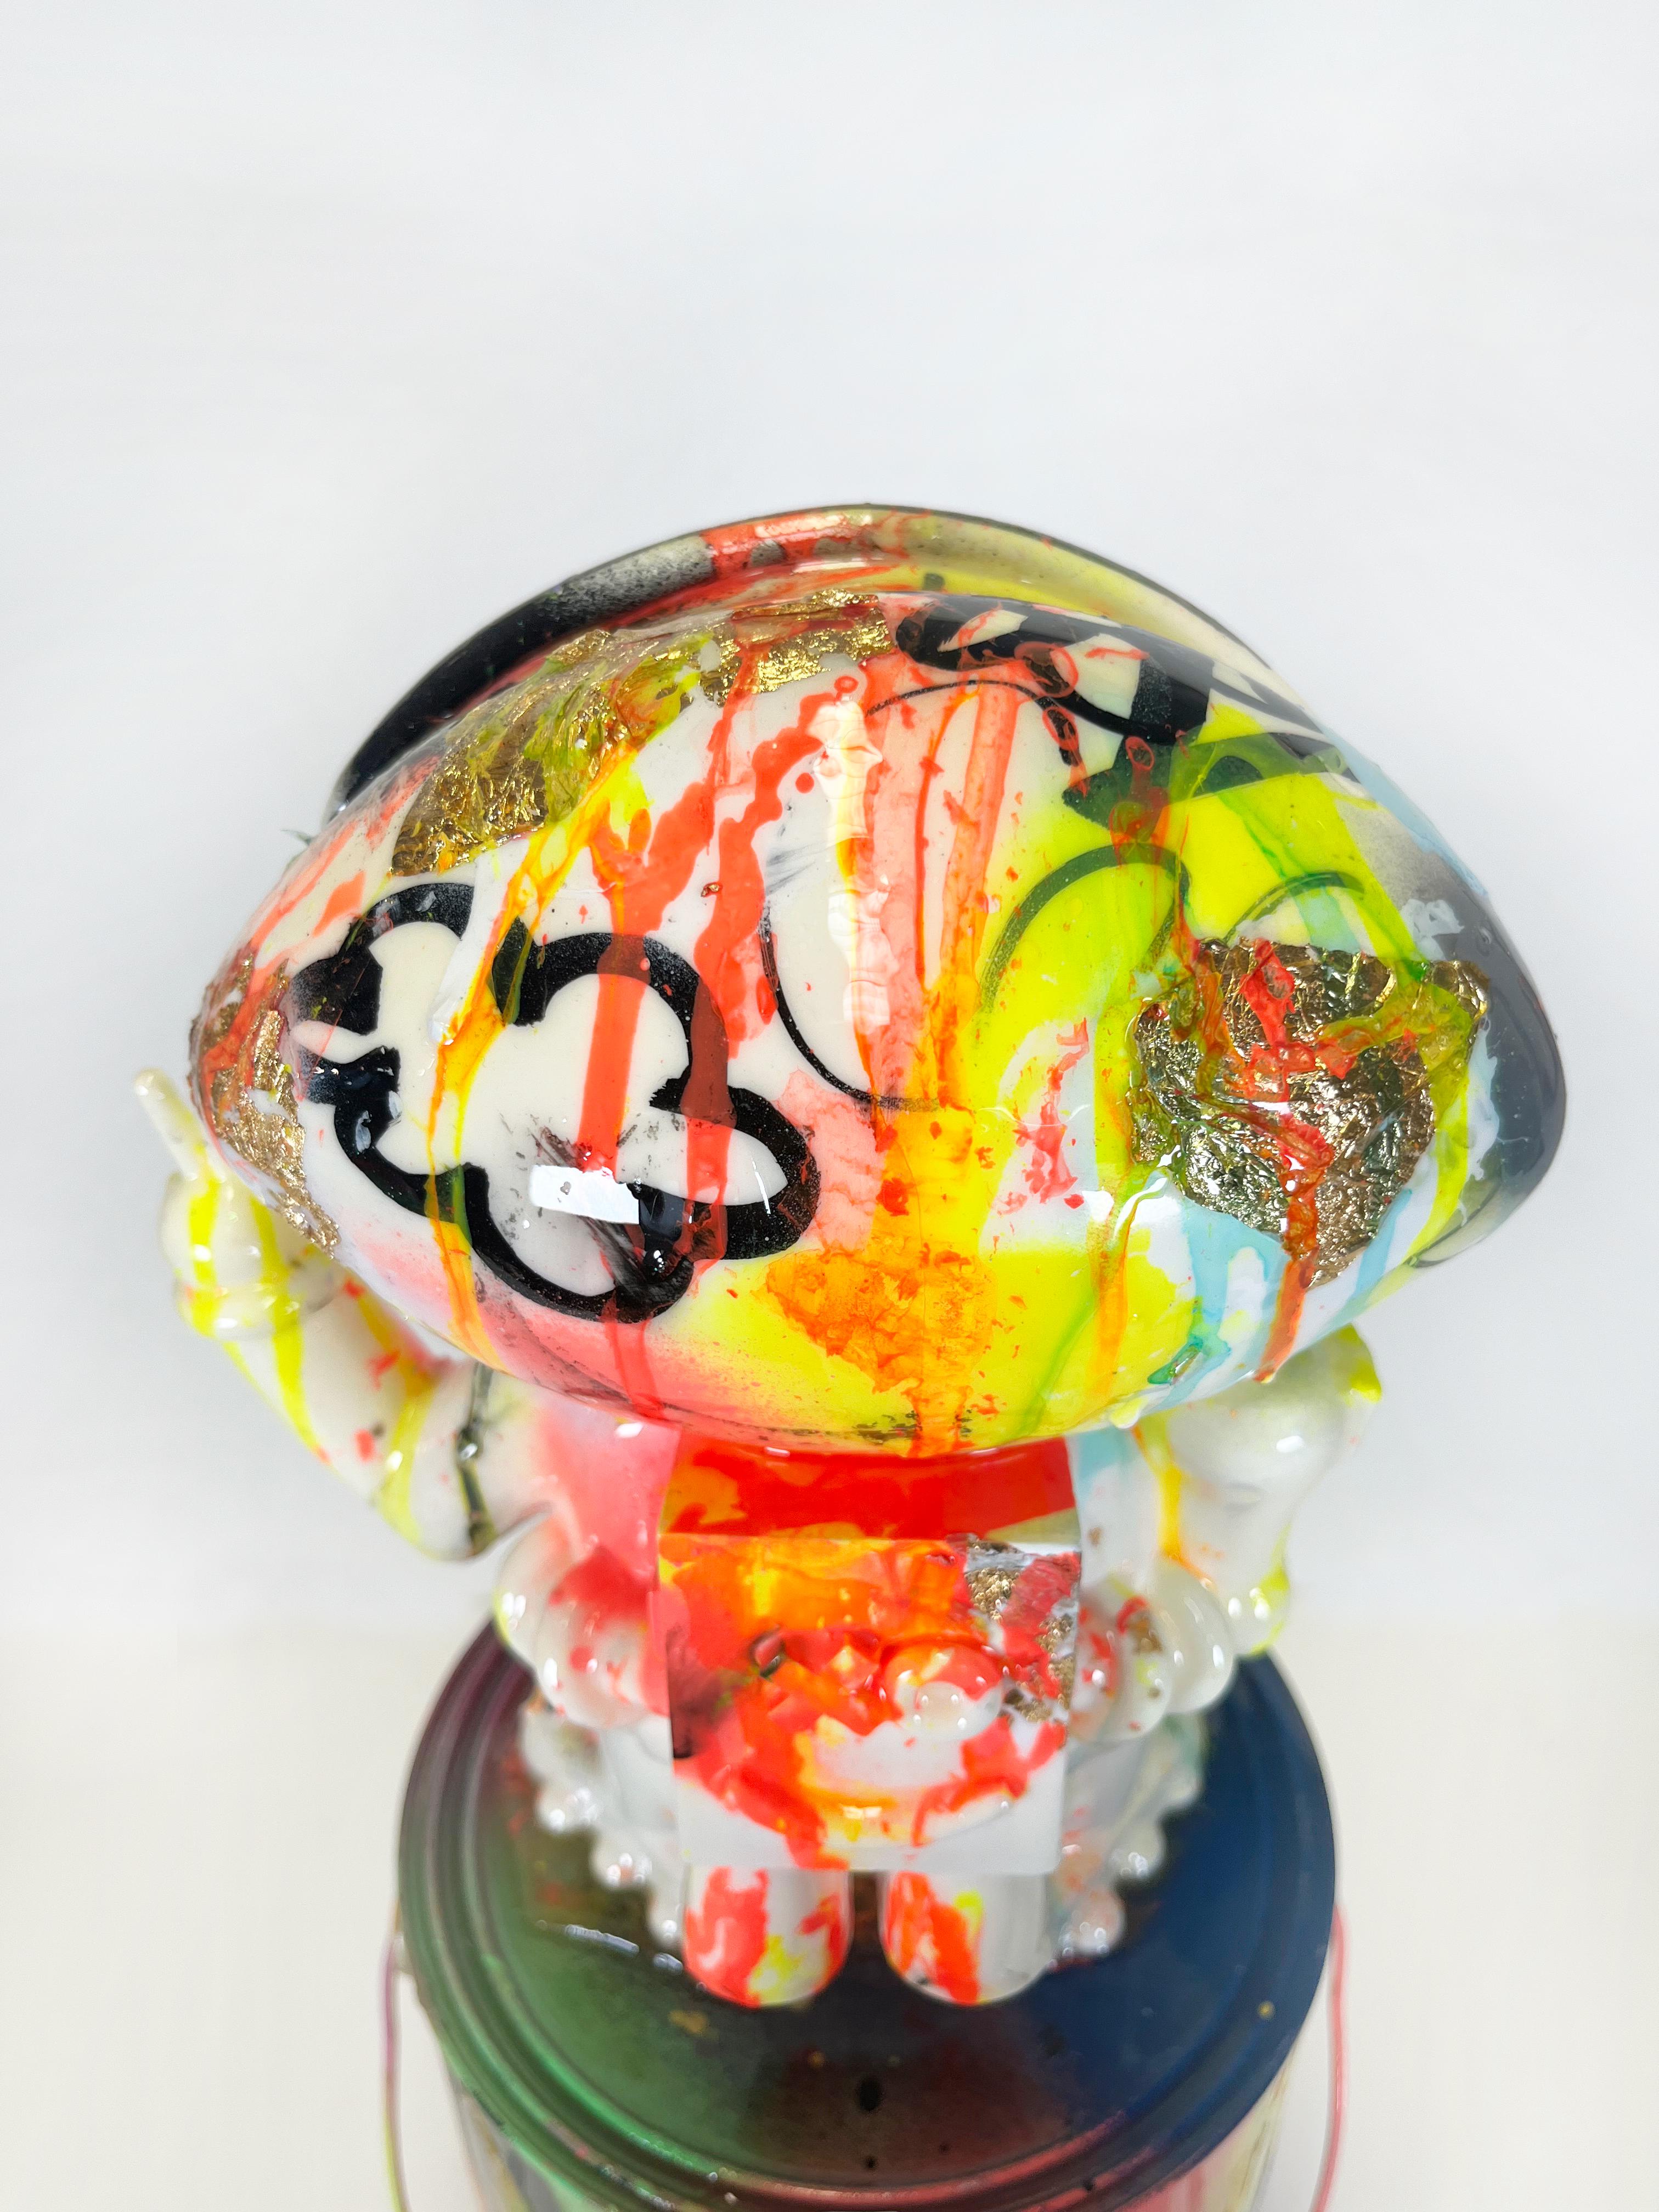 Technicolour Xeno Paint Can v2, colorful and cool resin cast figure sculpture - Abstract Sculpture by Chris Solcz